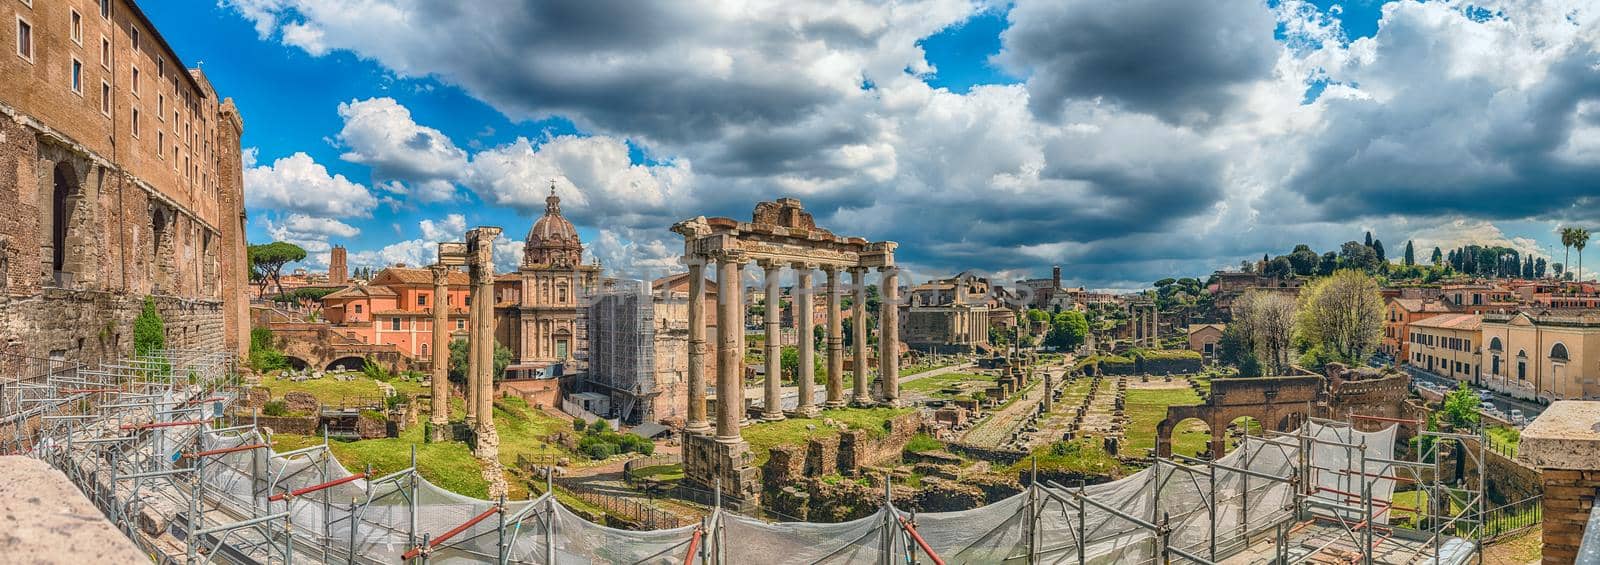 Scenic panoramic view over the ruins of the Roman Forum in Rome, Italy